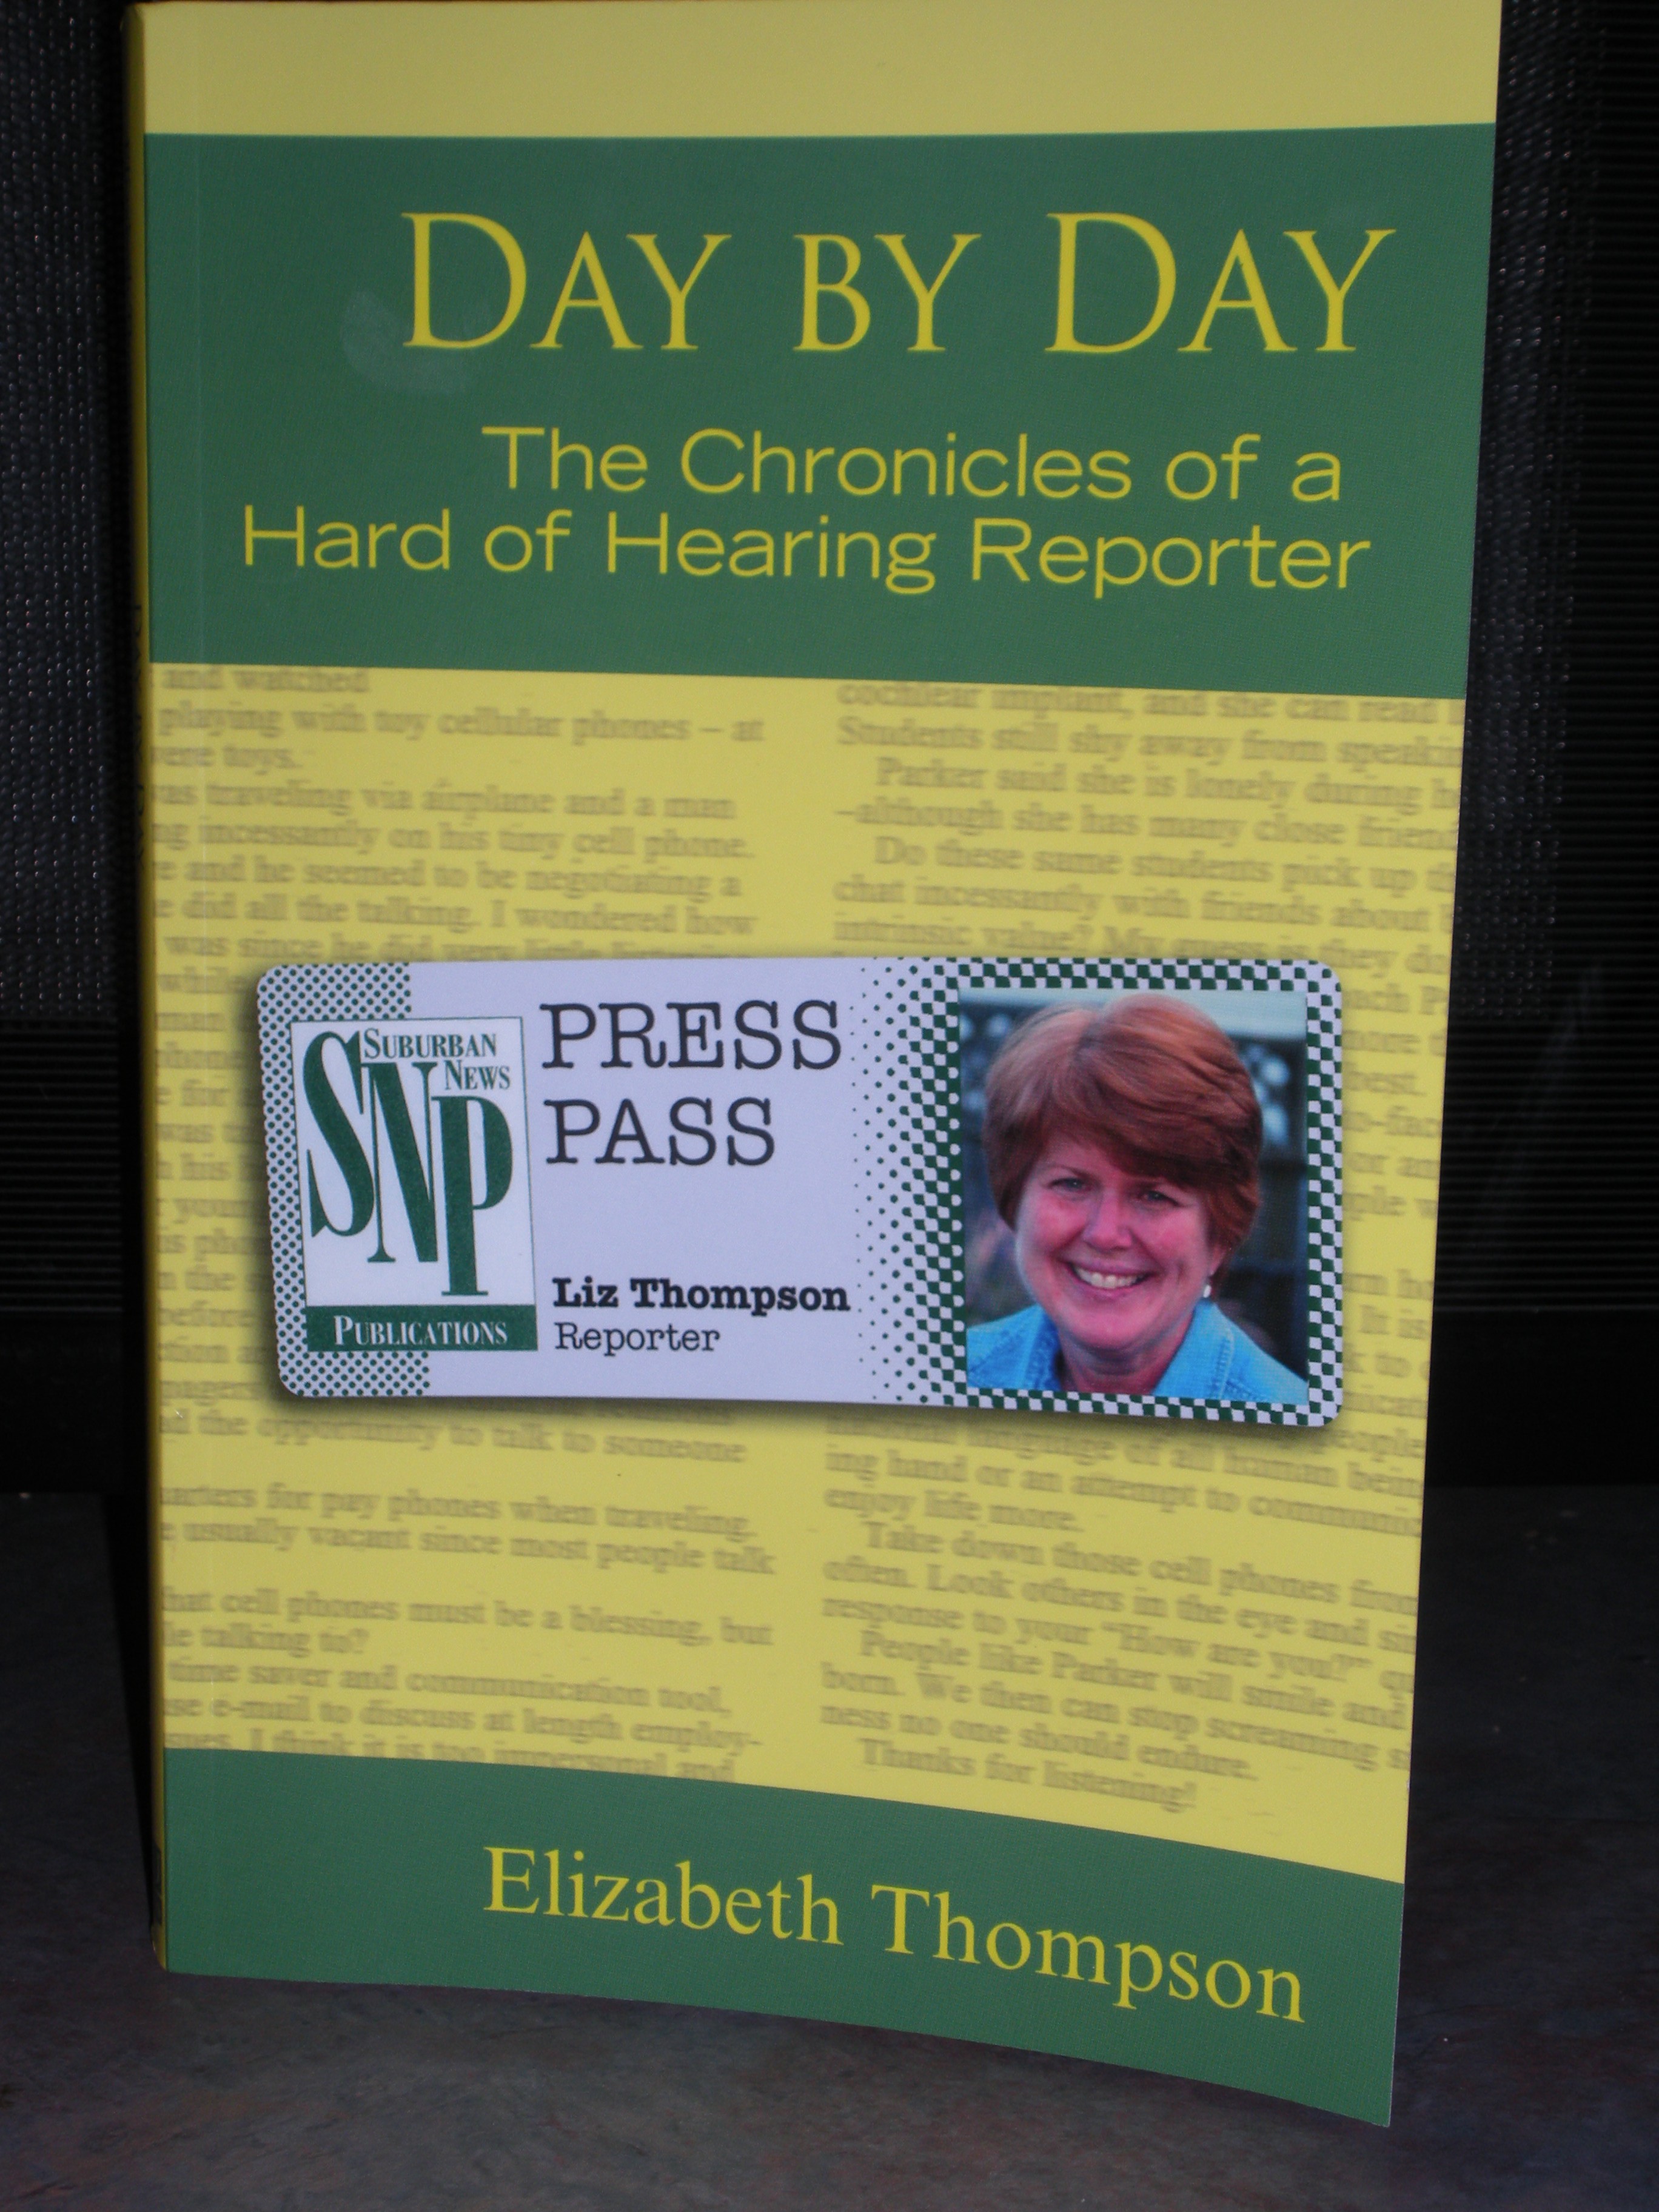 Day by Day, The Chronicles of a Hard of Hearing Reporter